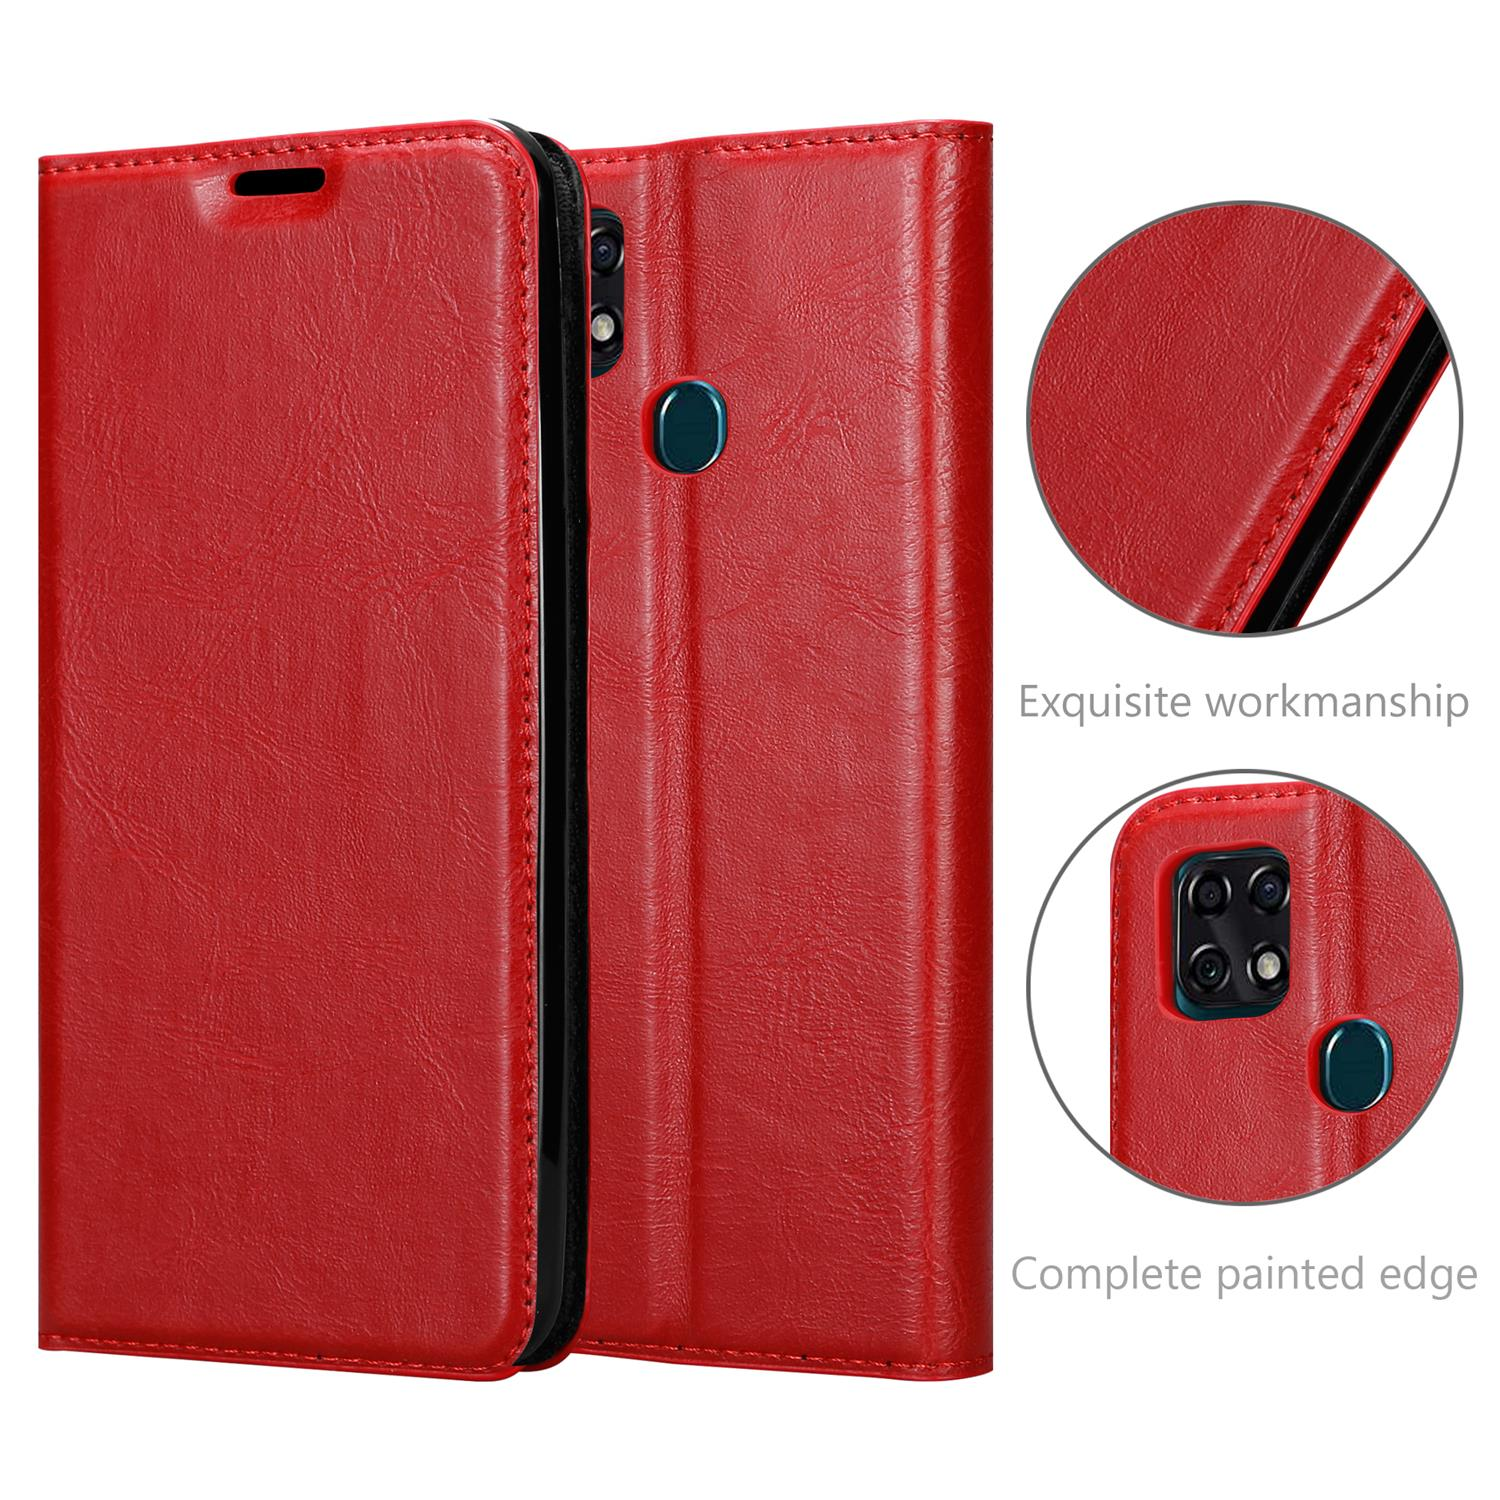 APFEL Magnet, 10 CADORABO ZTE, ROT Blade Book Invisible SMART, Hülle Bookcover,